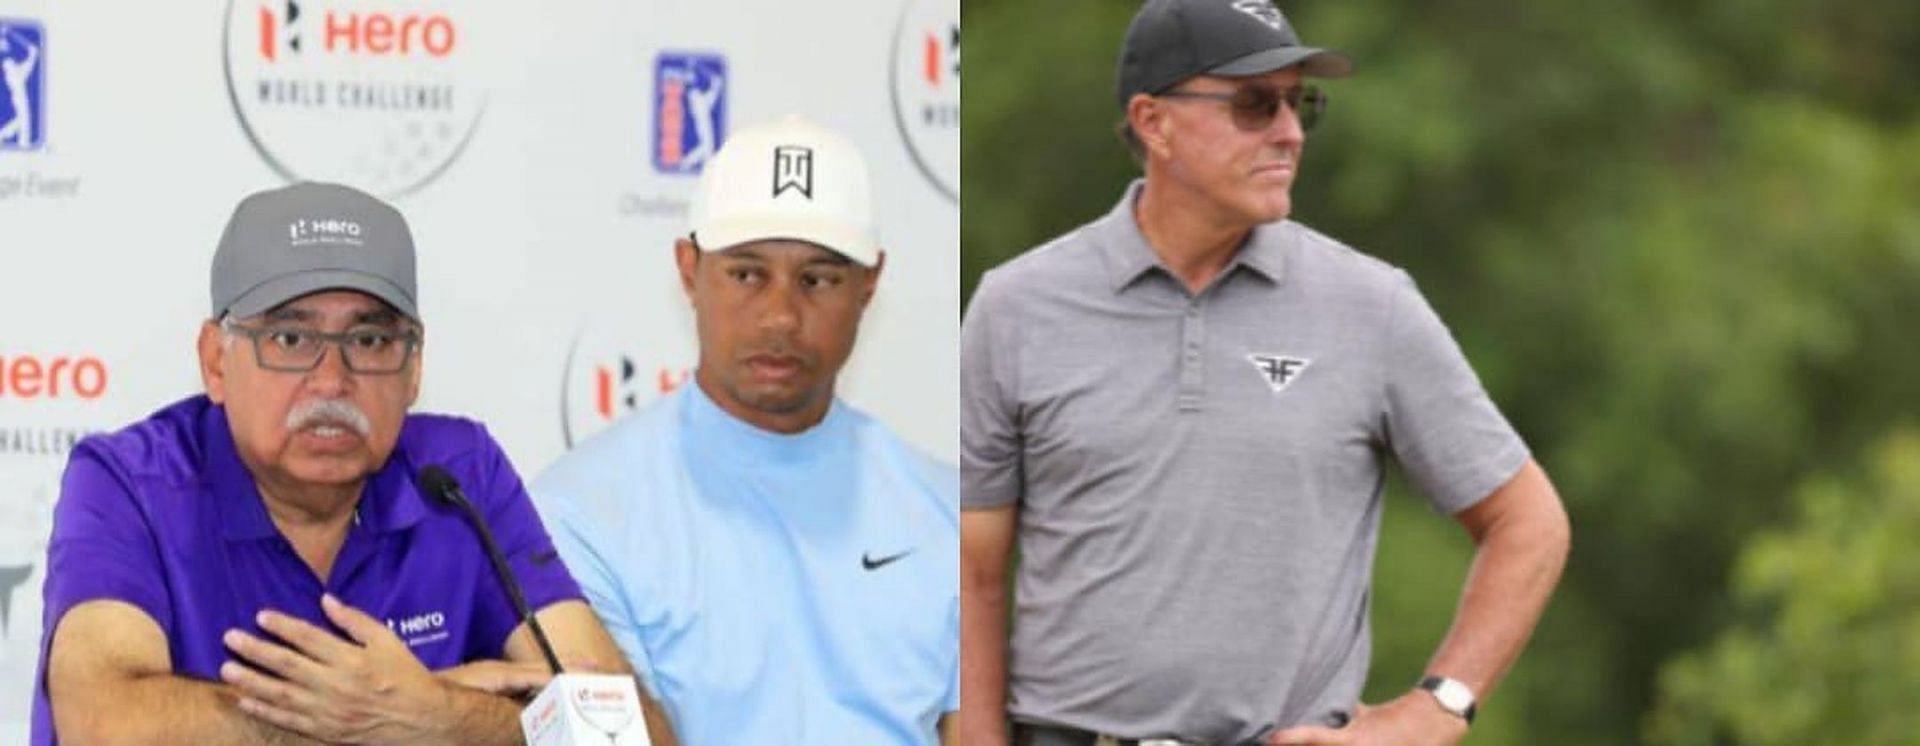 Tiger Woods&rsquo; close companion spotted with Phil Mickelson